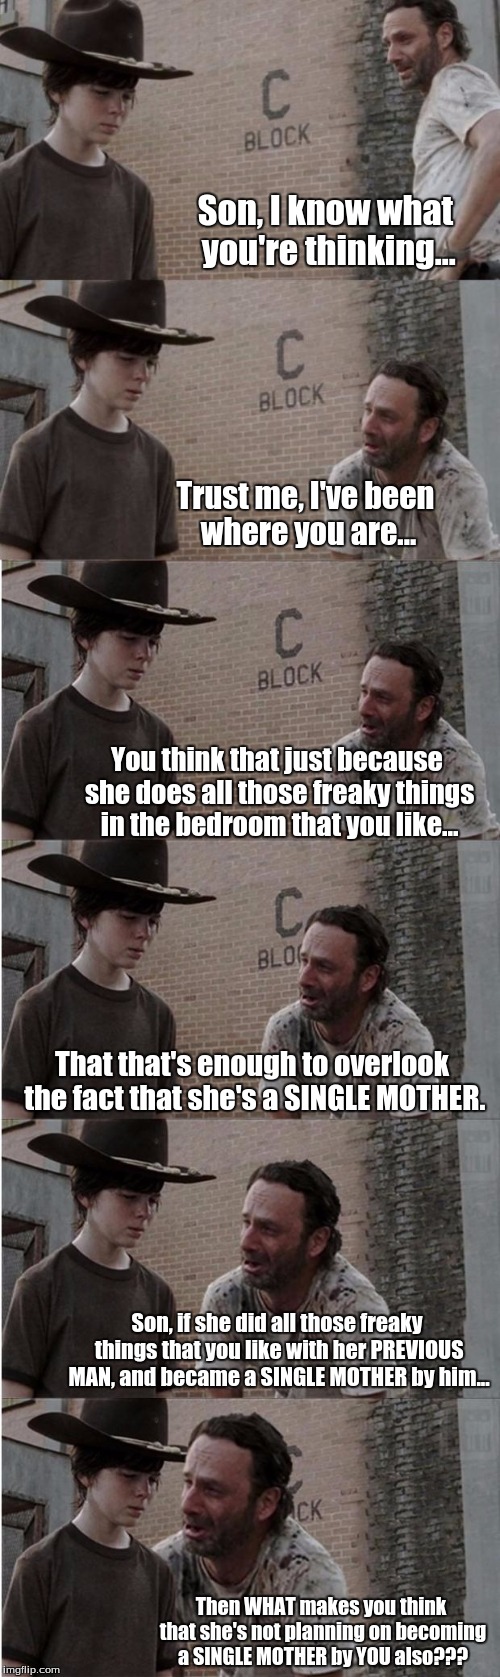 Rick and Carl Longer Meme | Son, I know what you're thinking... Then WHAT makes you think that she's not planning on becoming a SINGLE MOTHER by YOU also??? Trust me, I | image tagged in memes,rick and carl longer | made w/ Imgflip meme maker